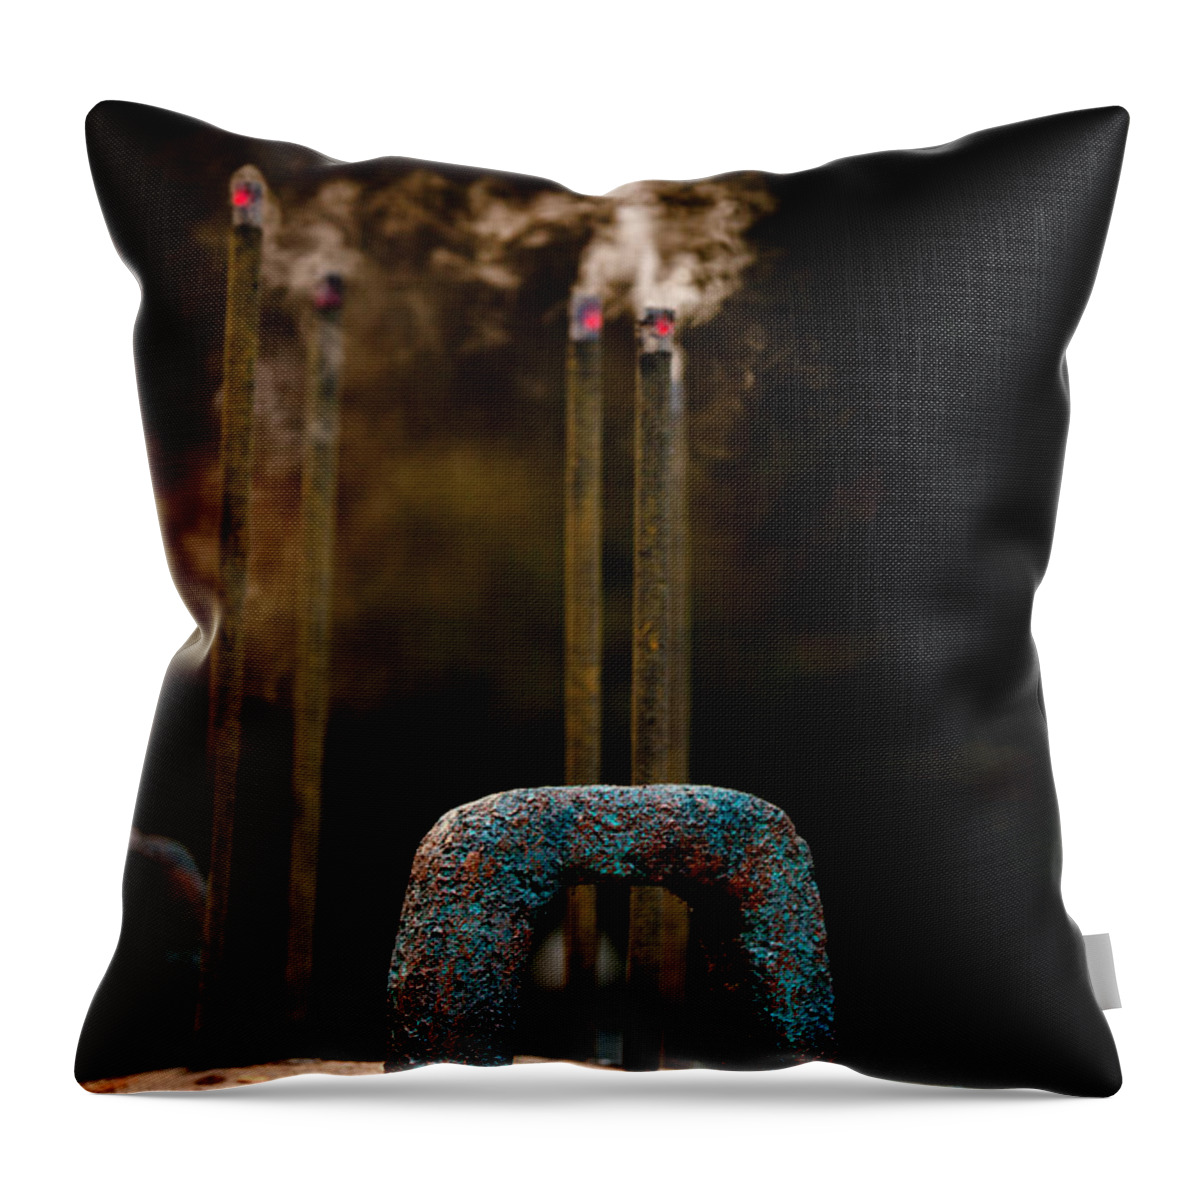 Zen Throw Pillow featuring the photograph Asian Incense Burner by Art Block Collections